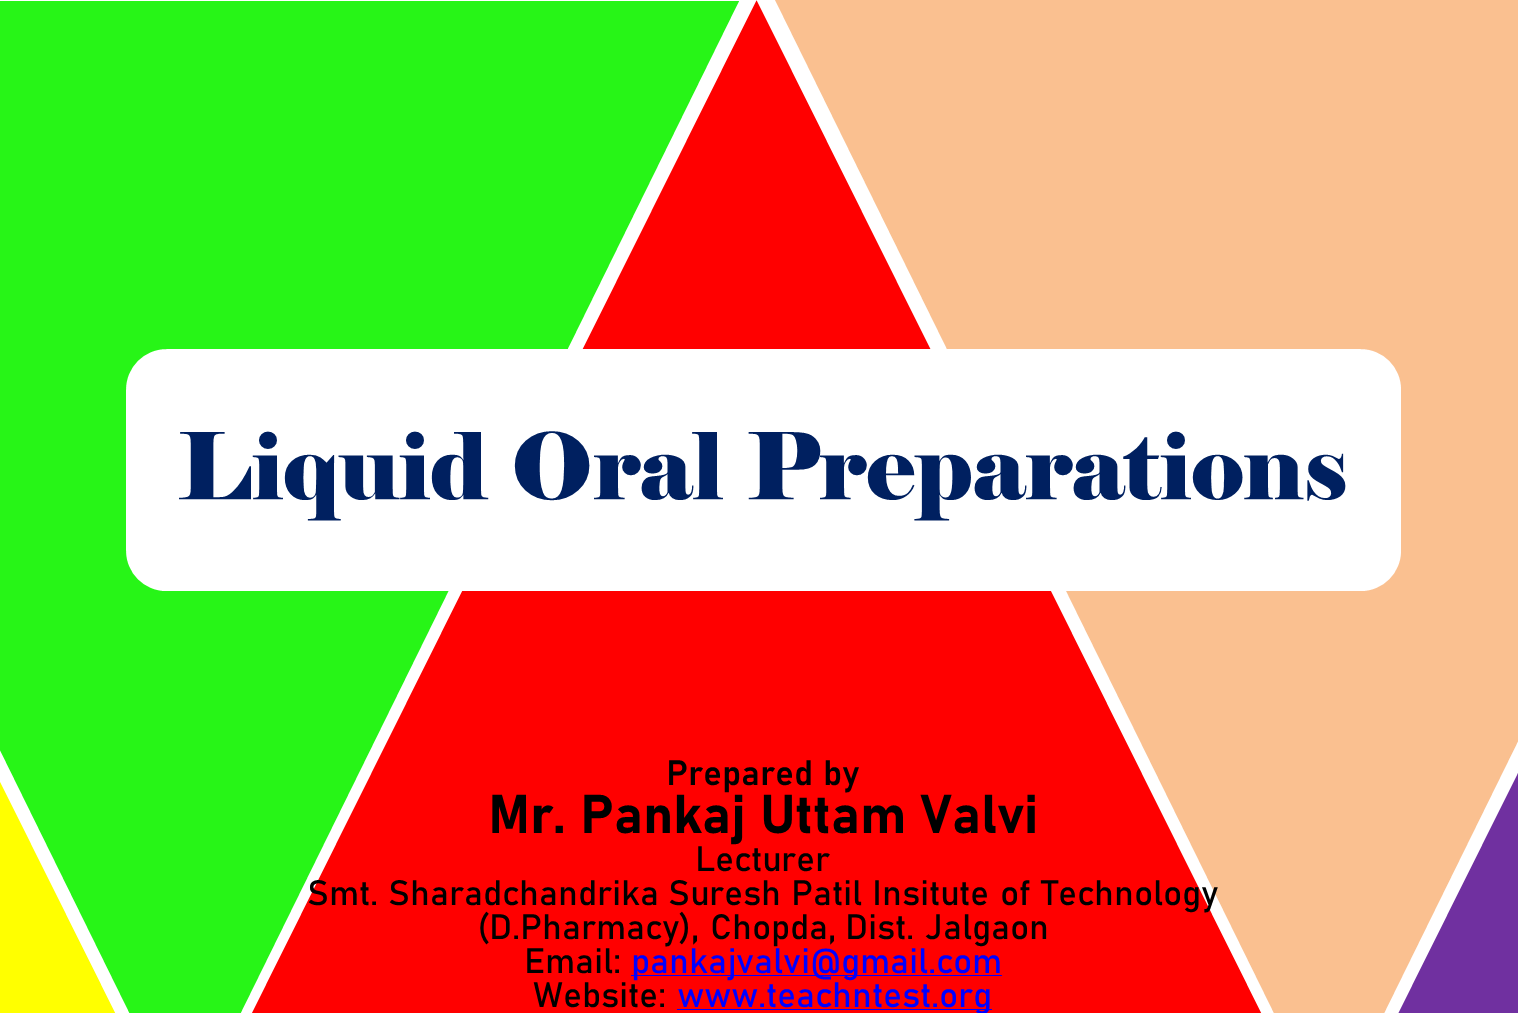 Liquid Oral Preparations PPT PDF: Solutions, Syrups, Elixirs, Emulsions, Suspensions, and Dry Powder for Reconstitution 2023